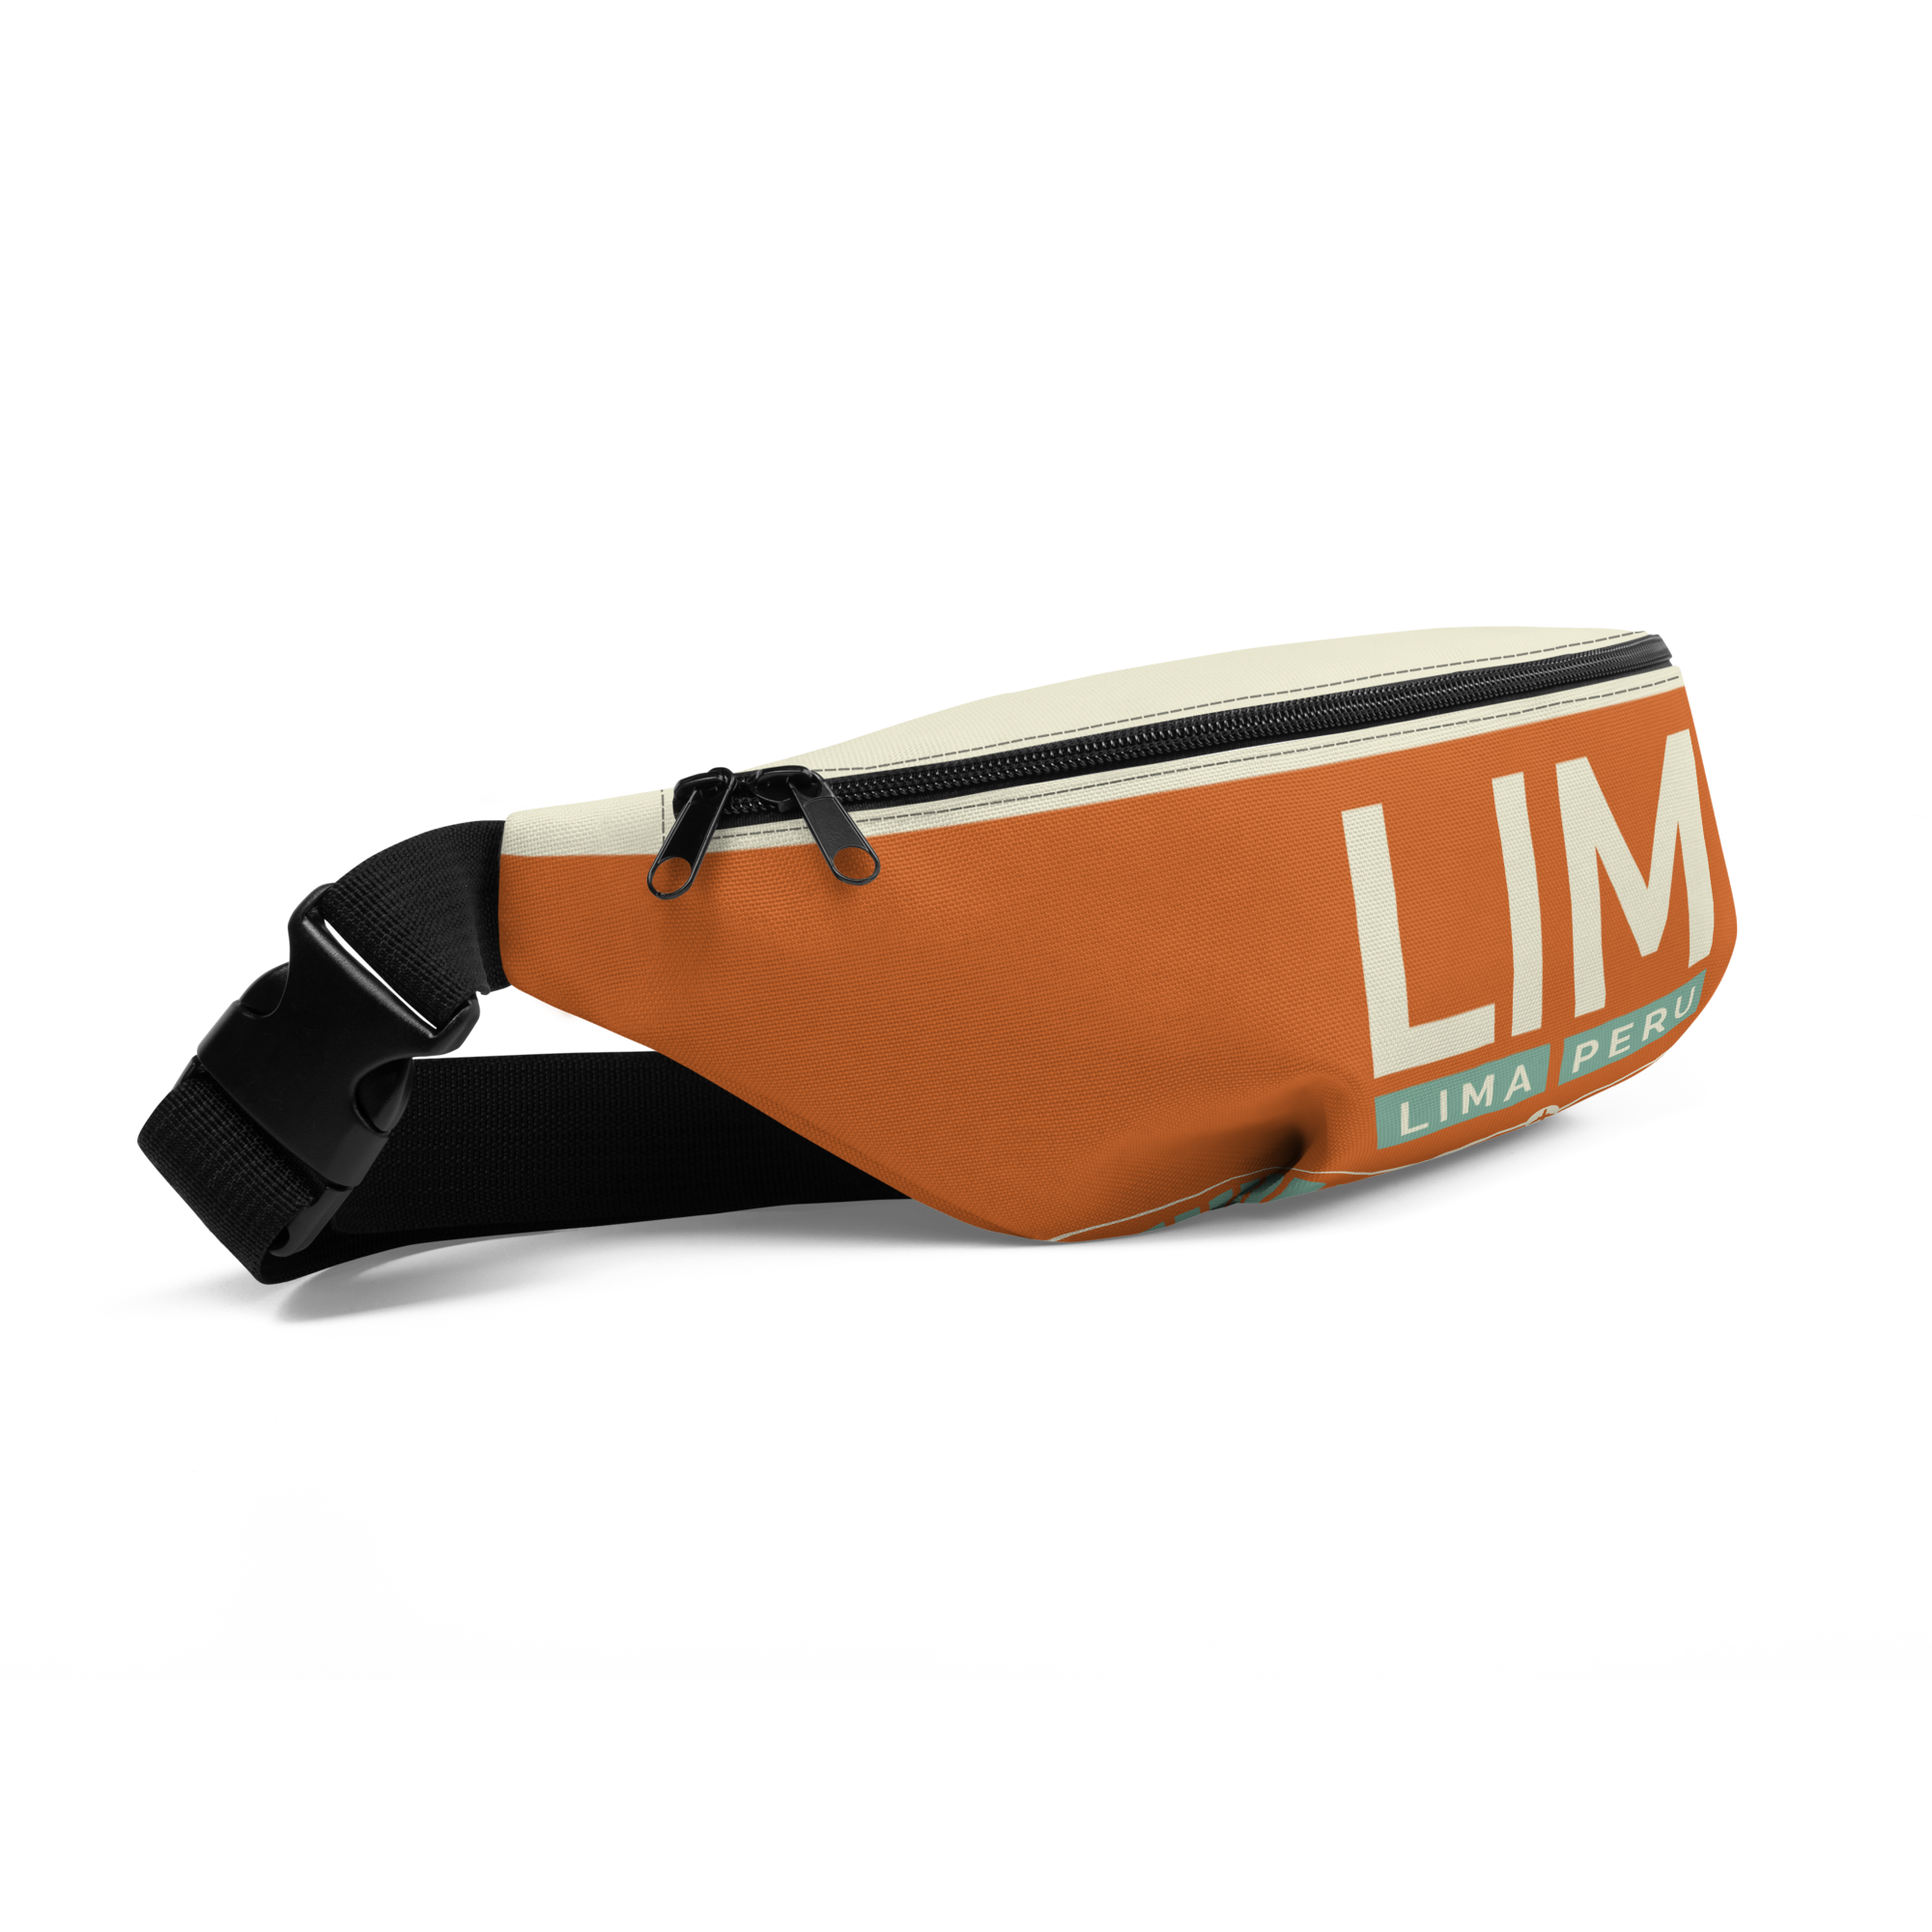 LIM - Lima airport code belt pouch